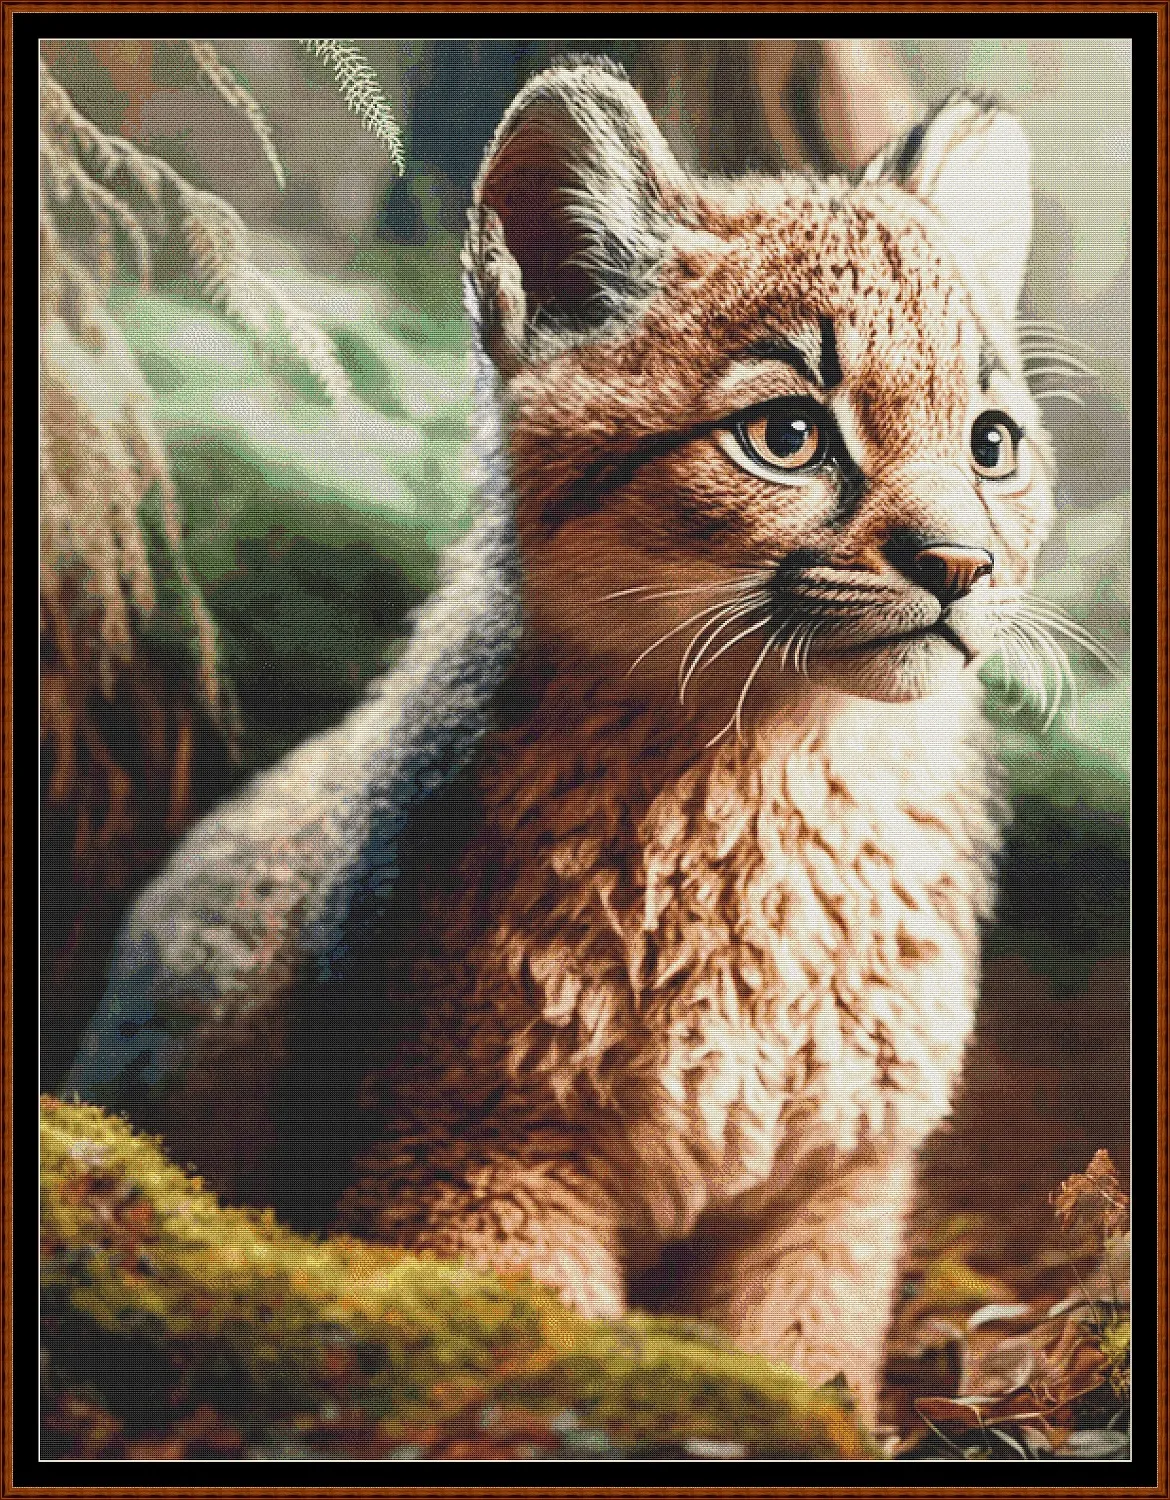 Forest Creatures - Cougar patterns are expertly created from art by Alan Frijins under Public Domain CC0 license